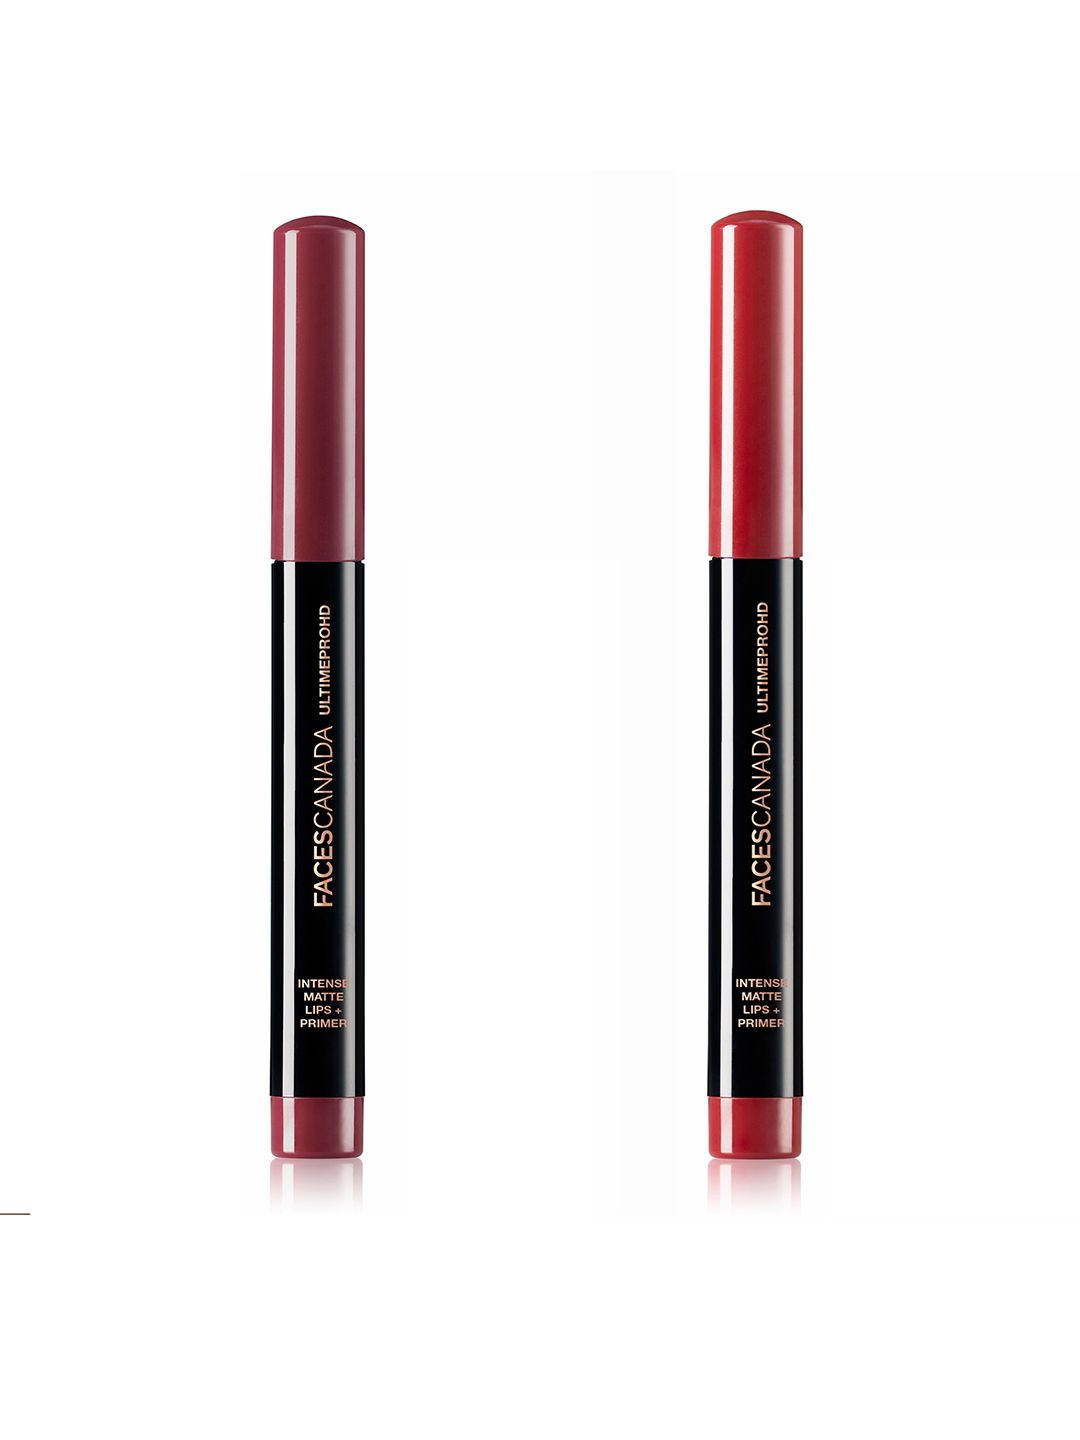 FACES CANADA Set of 2 UltimePro HD Intense Matte Lipsticks - Scandalous & Crushed Berry Price in India